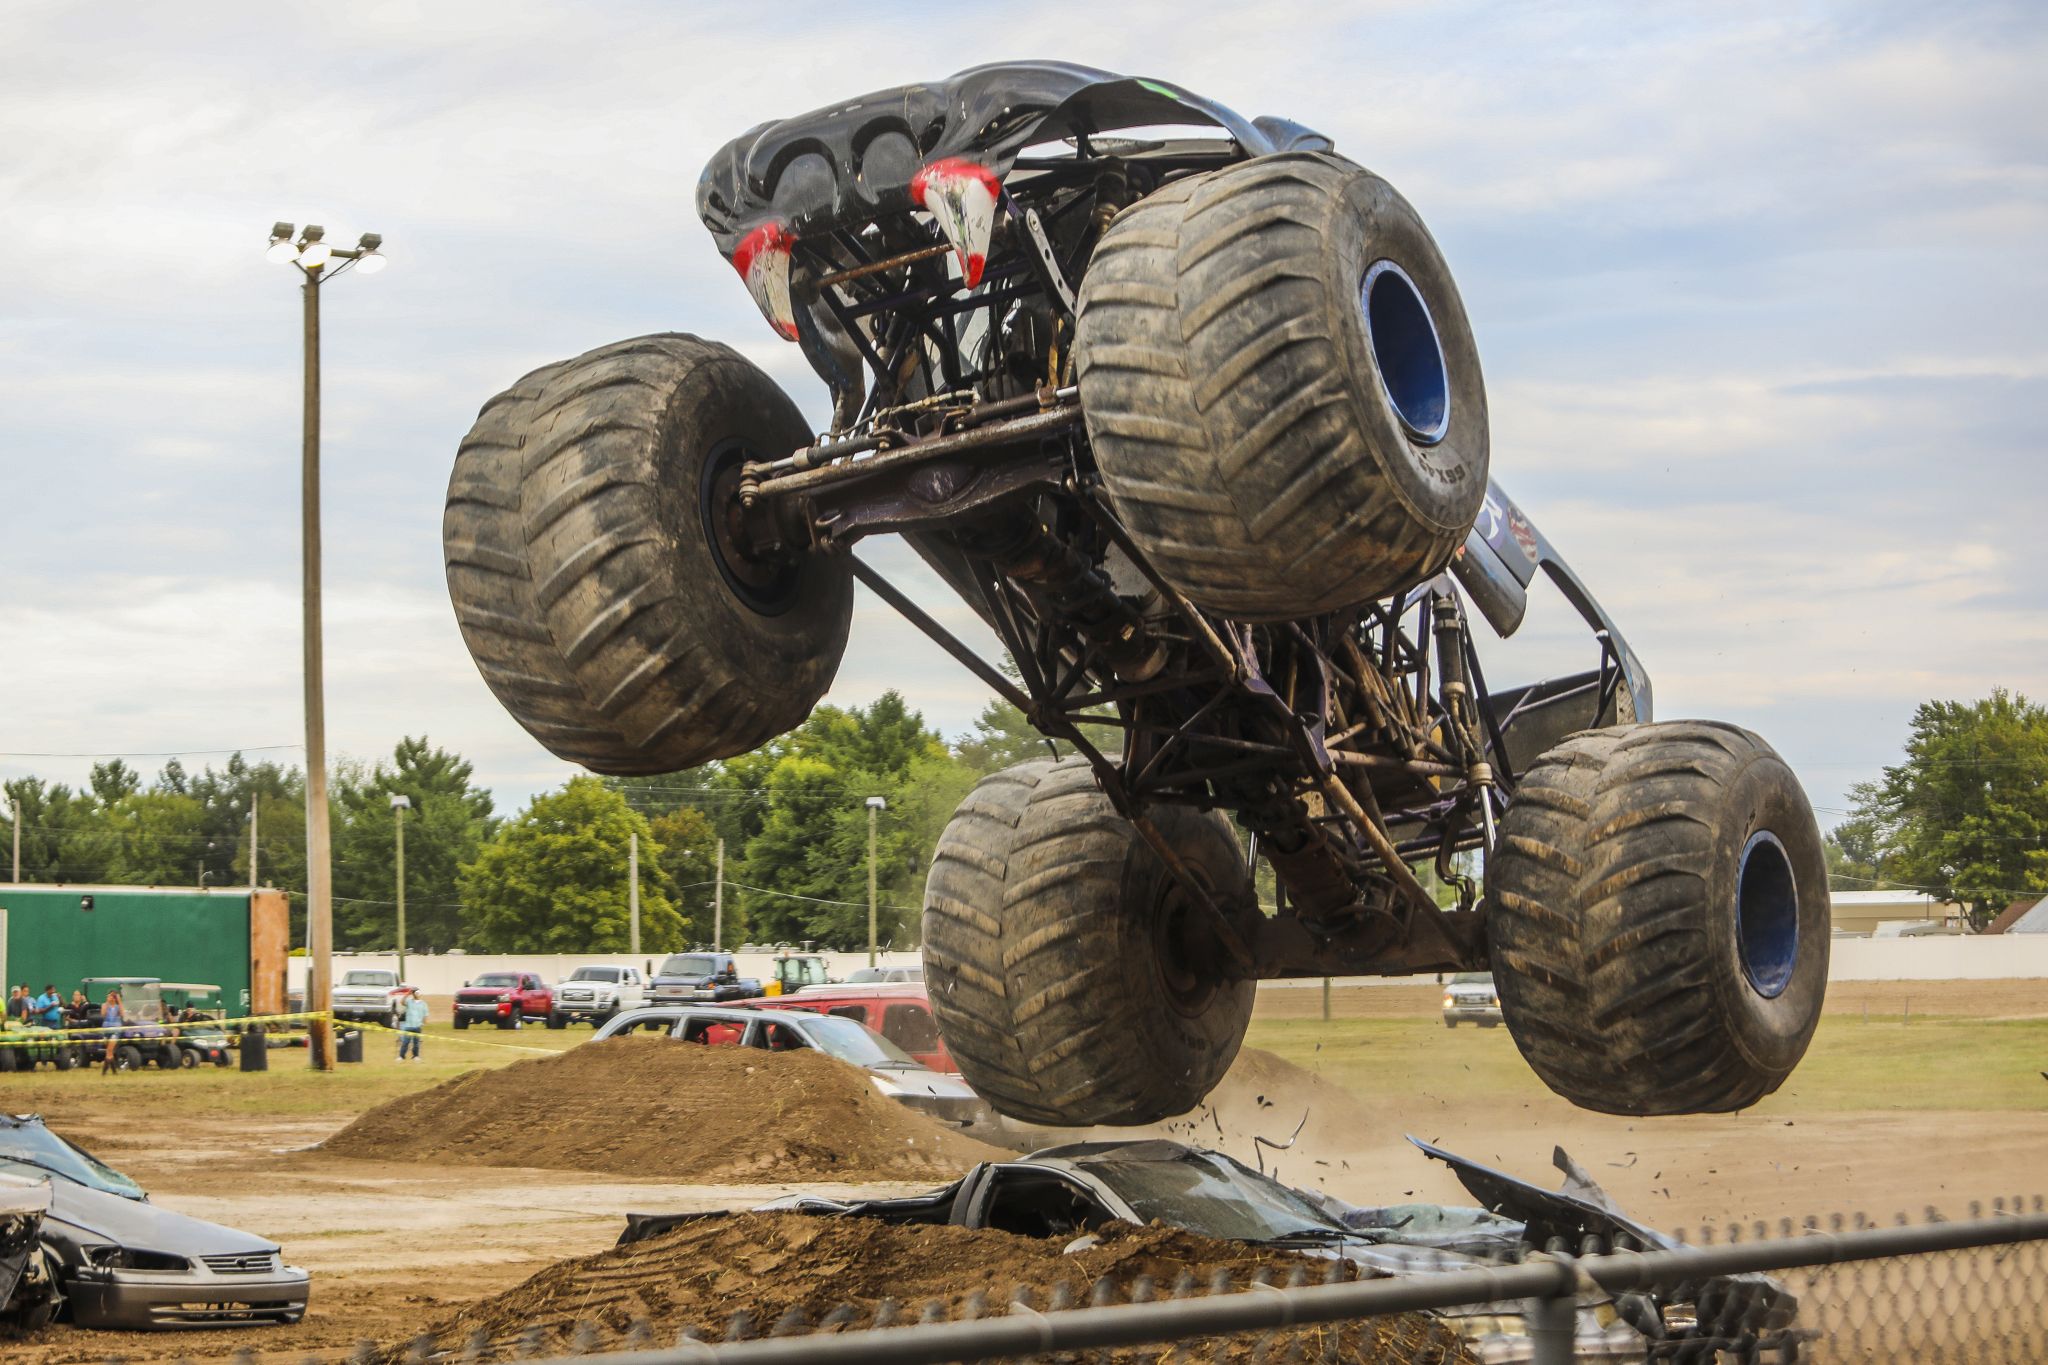 Monster truck rally during Midland County Fair Aug. 14, 2019